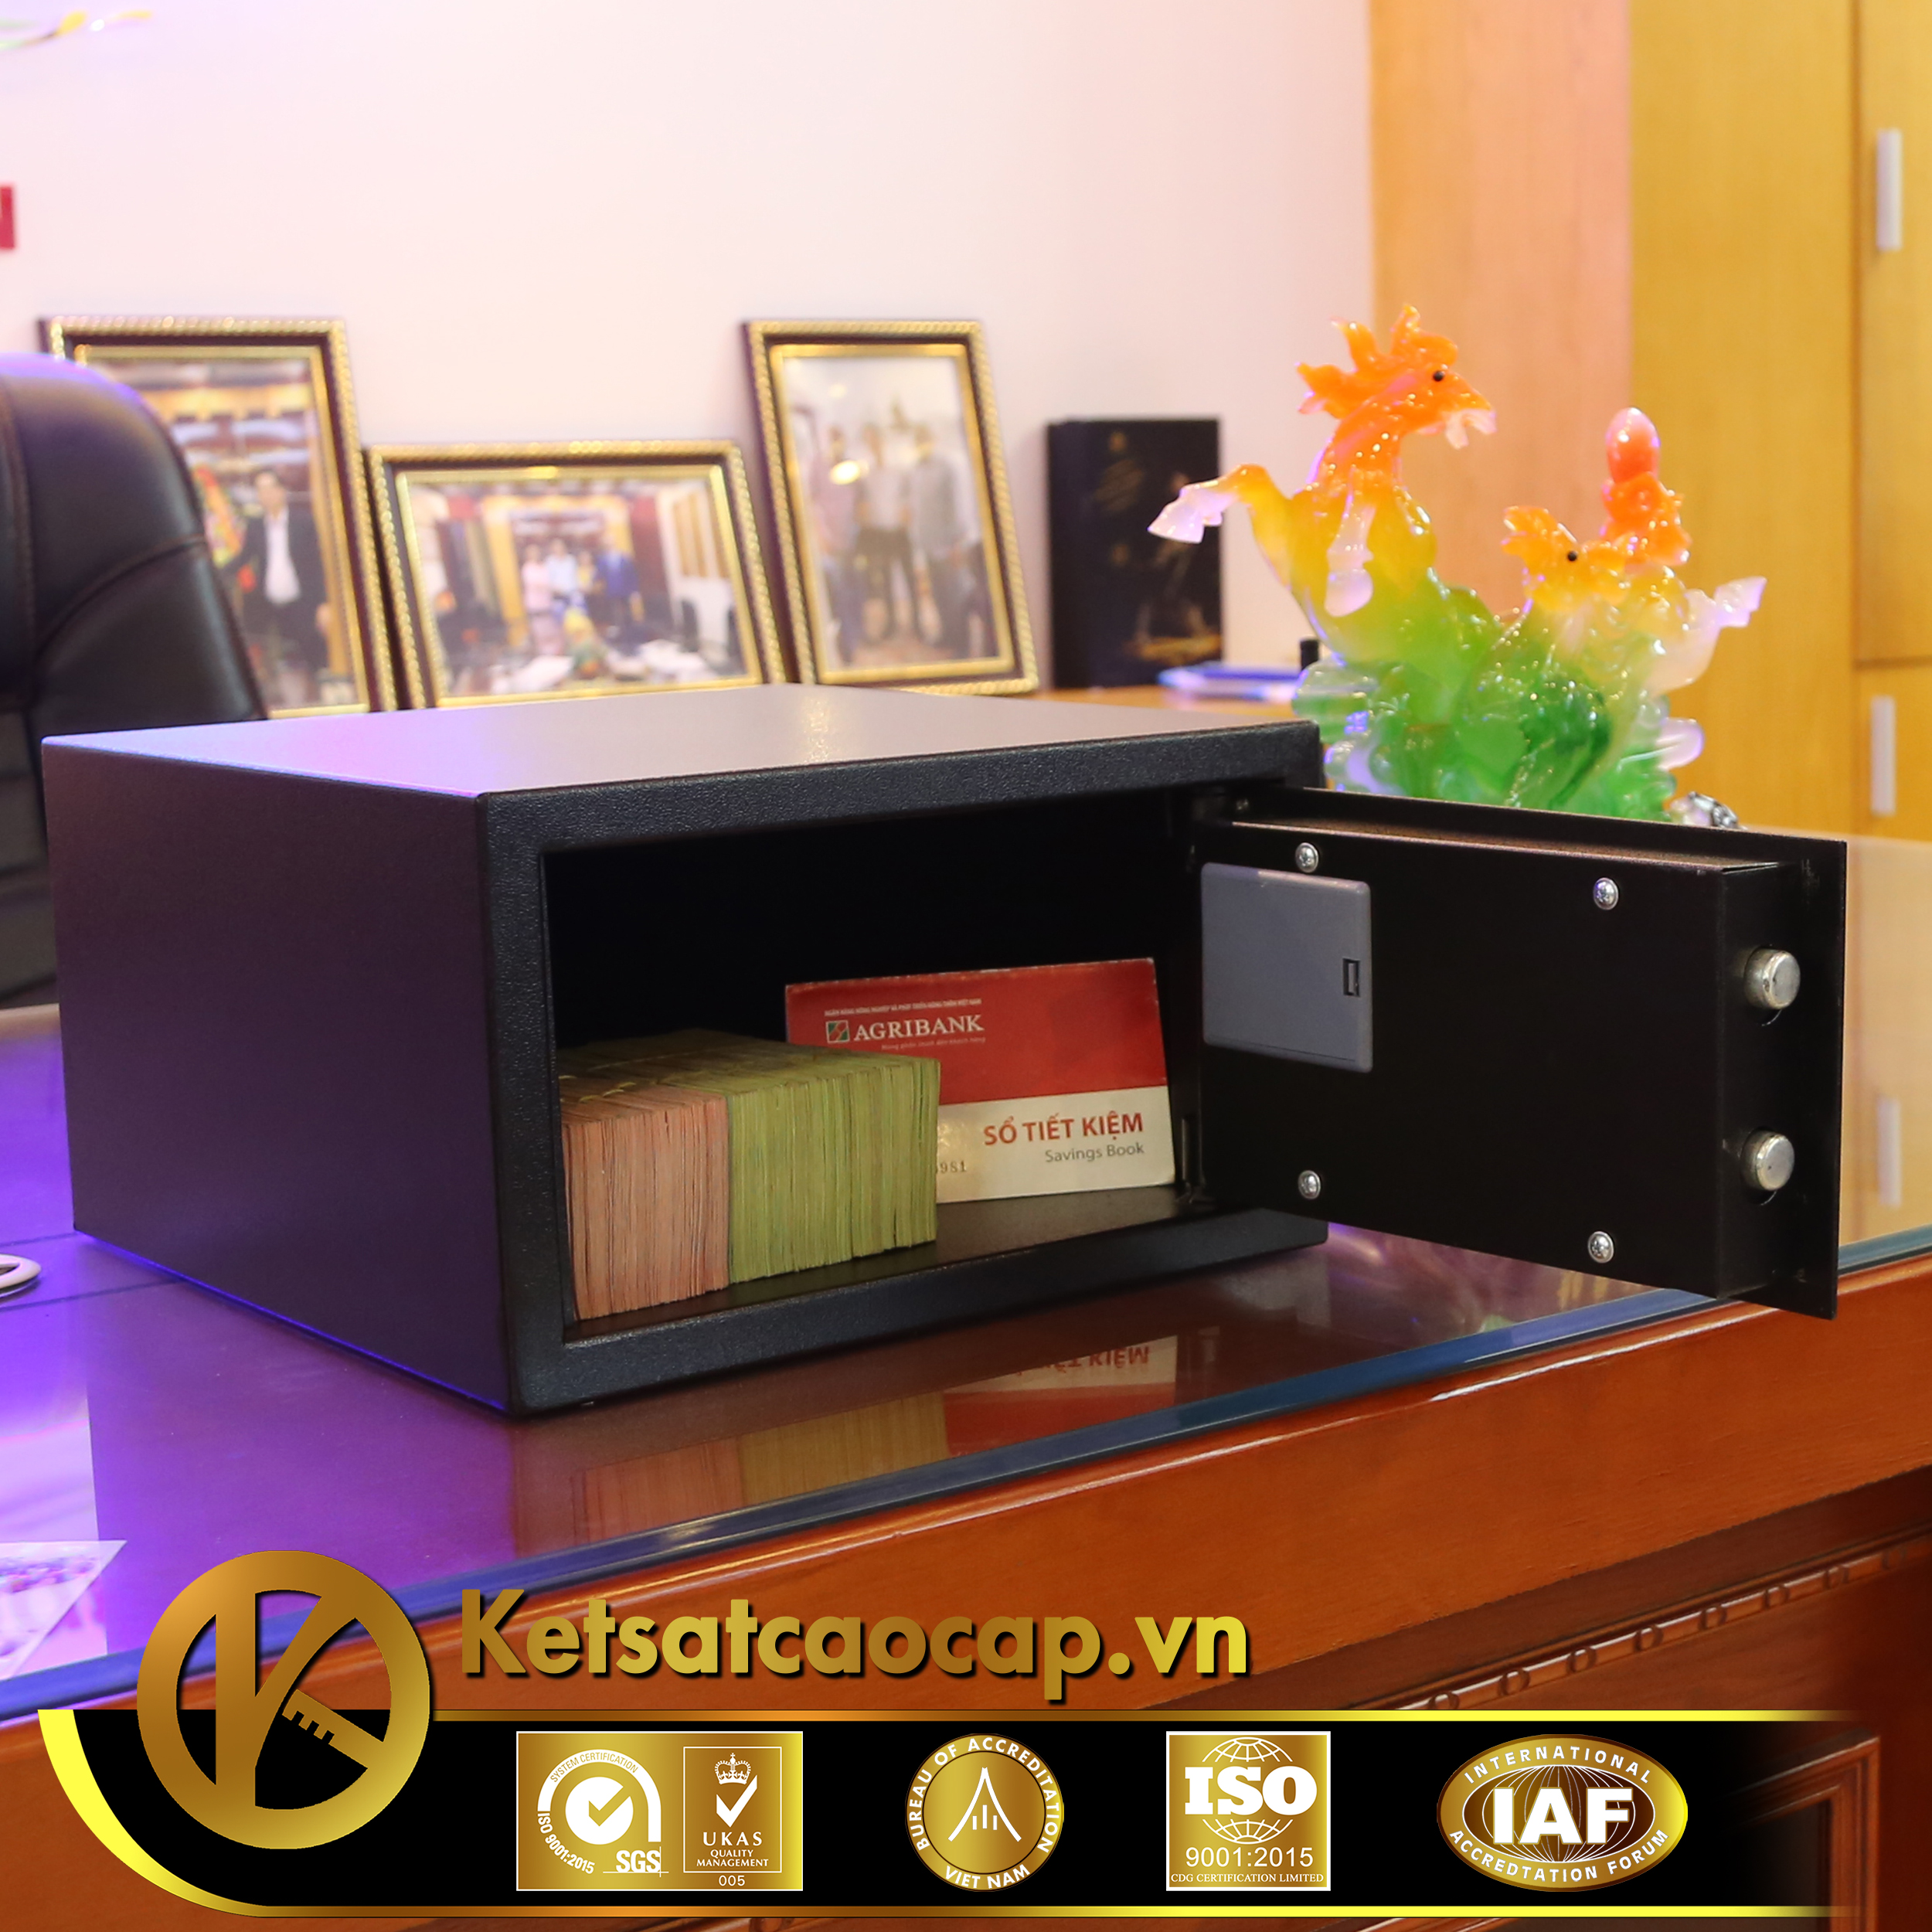 Hotel Safety Deposit Box Suppliers and Exporters‎ For Sale